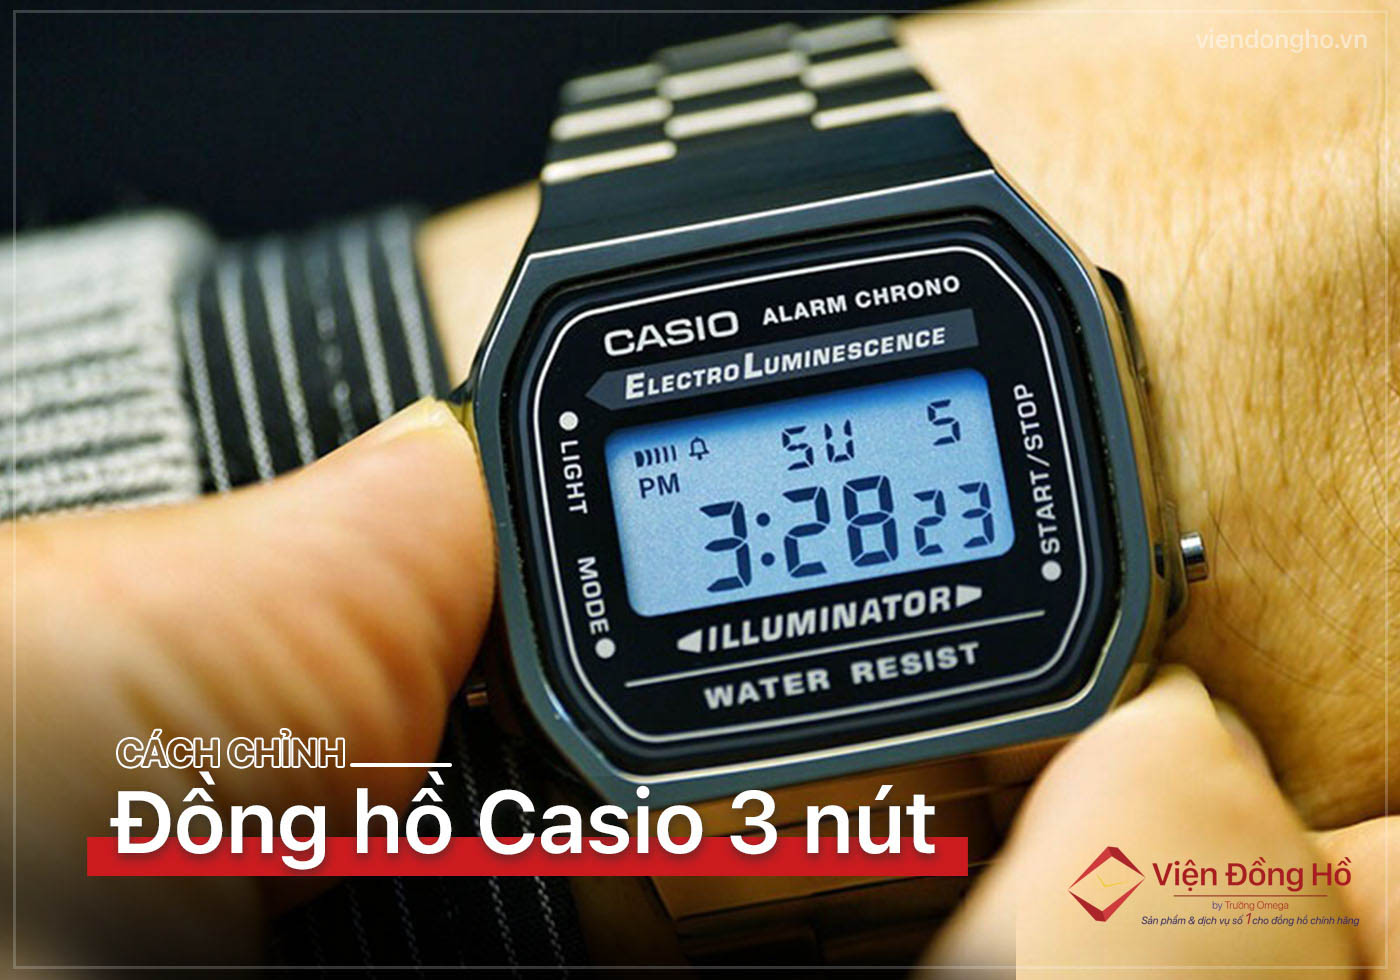 Cach chinh dong ho Casio 3 nut don gian nhat 6